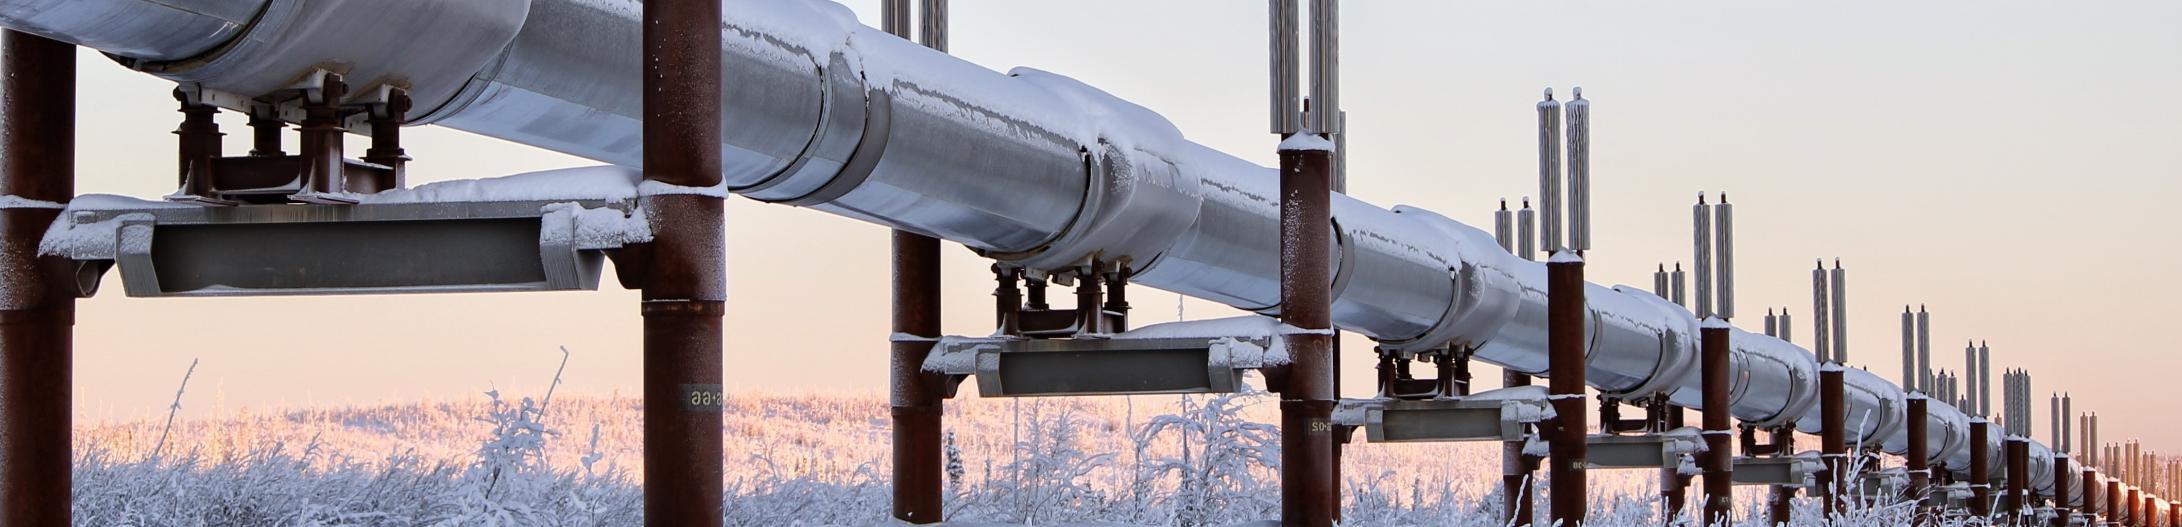 Are you ready to take control of your pipelines?